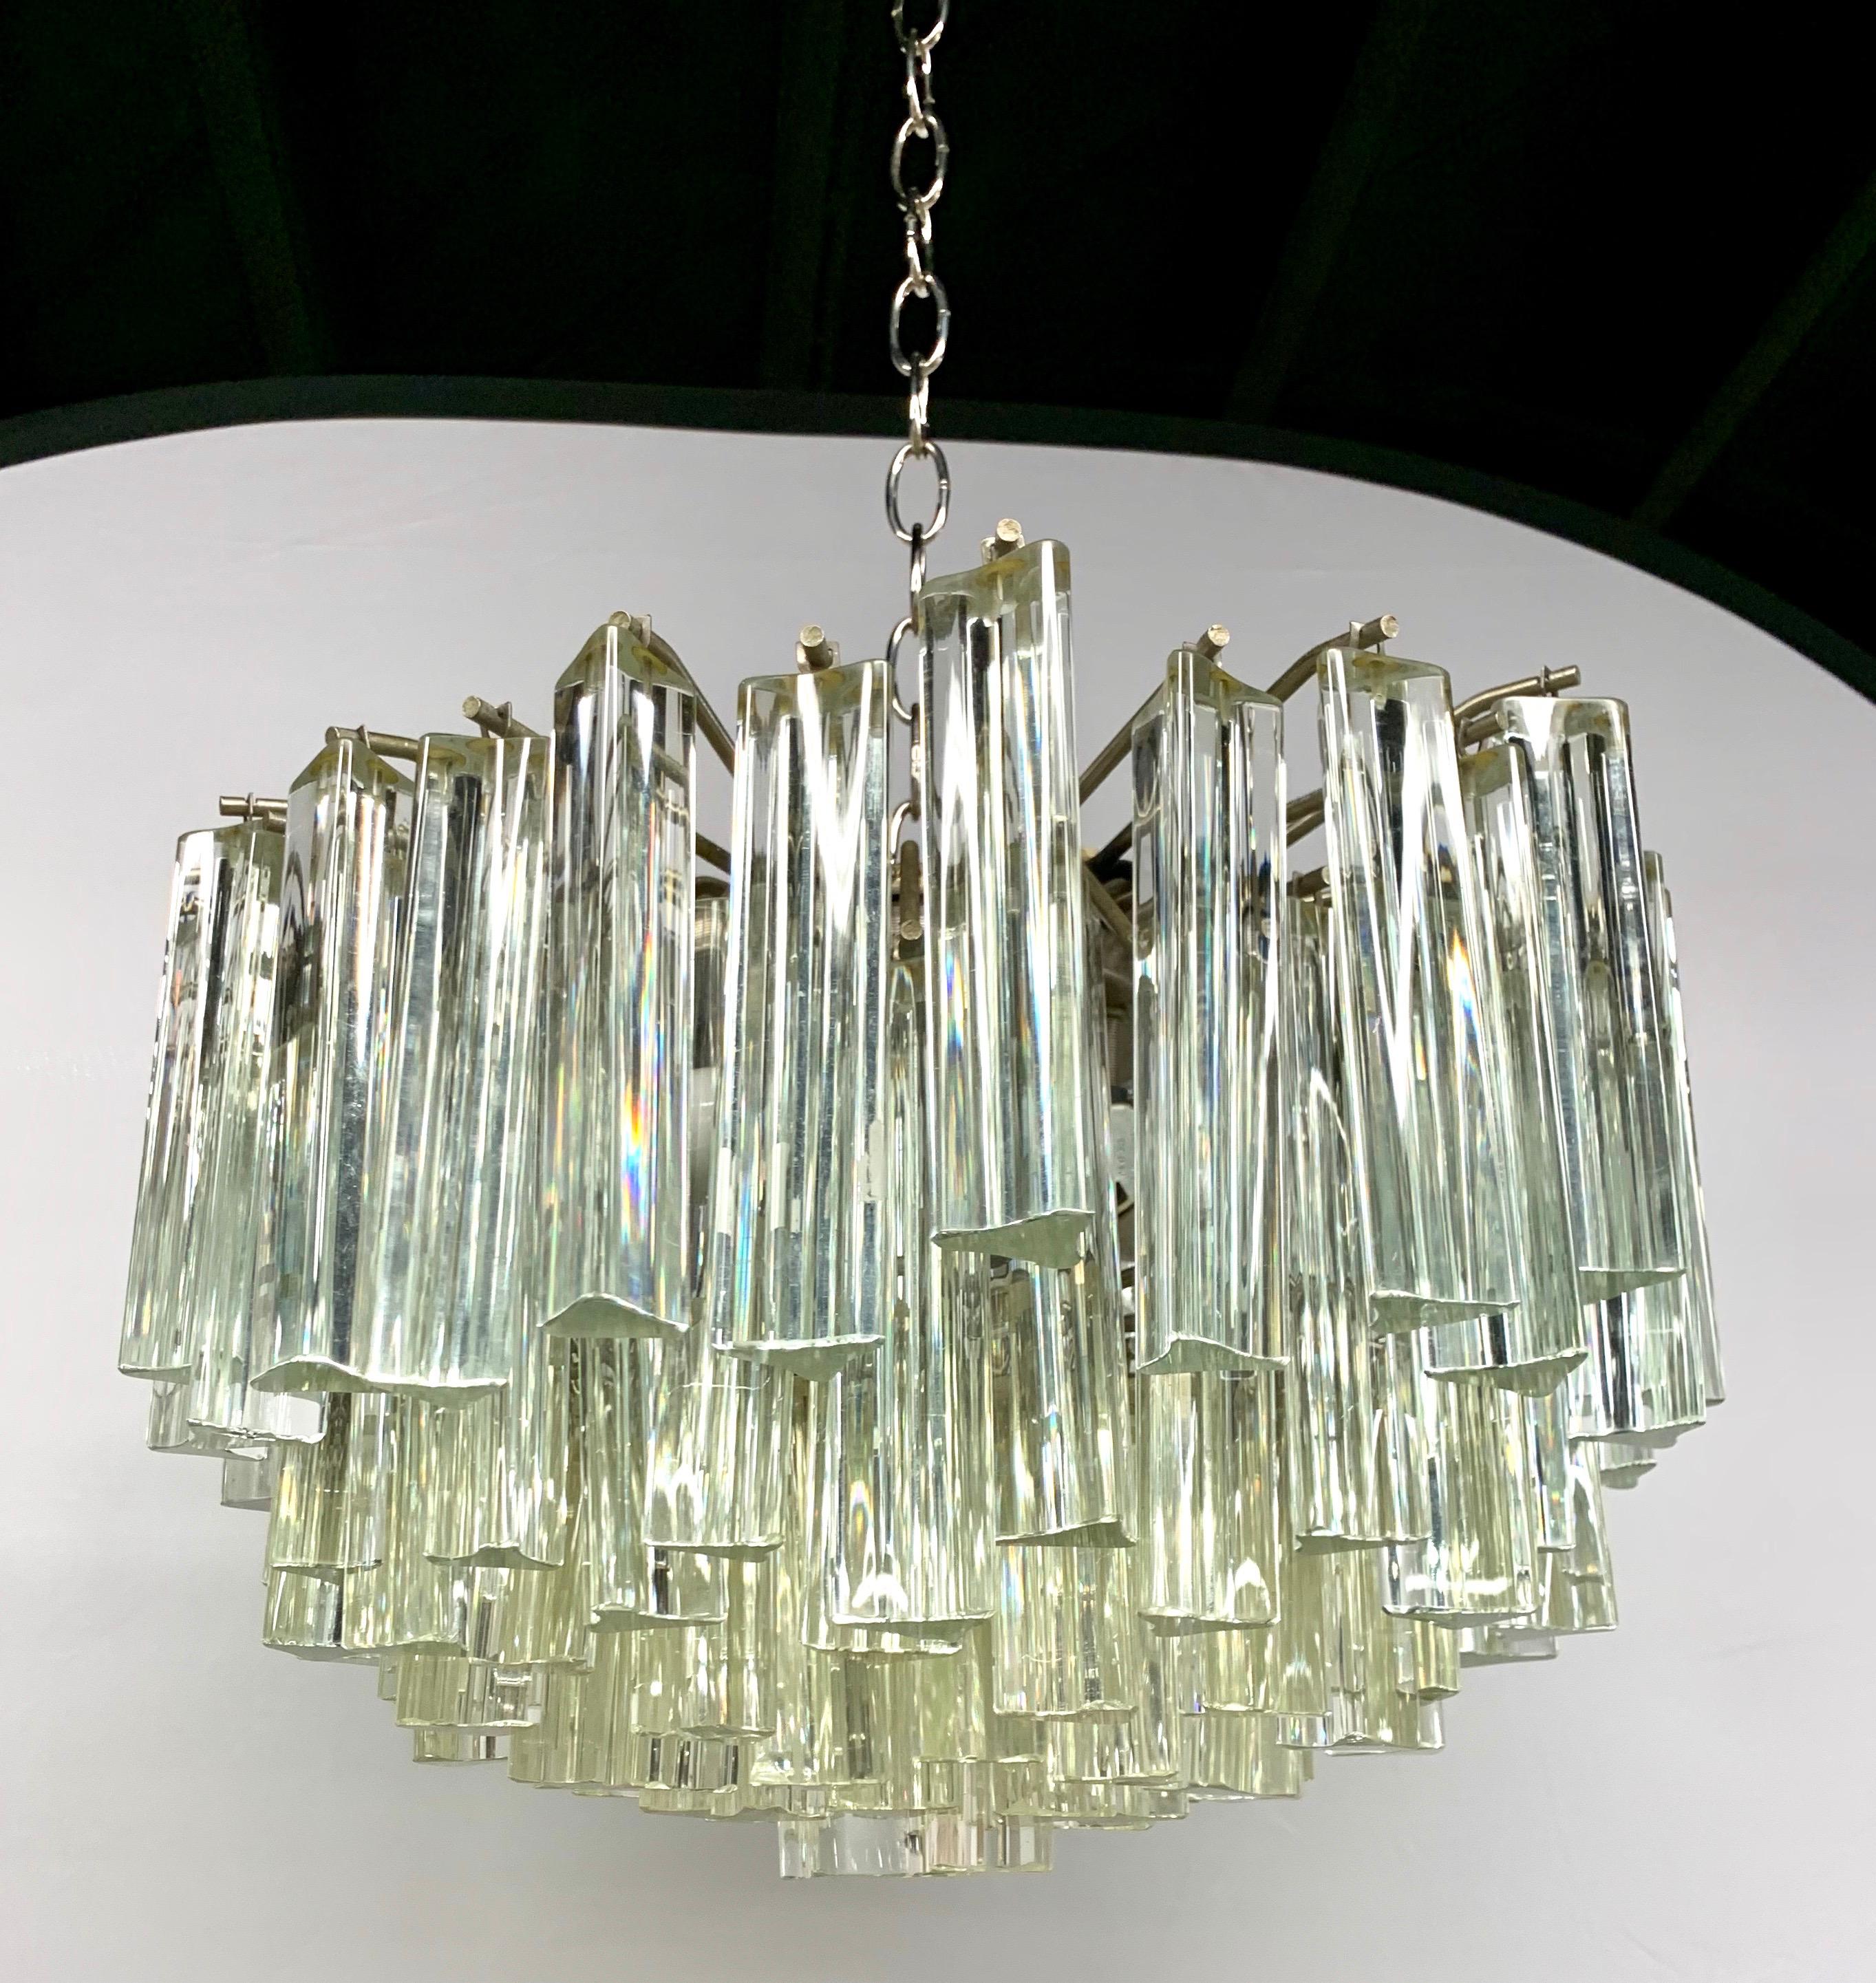 Elegant Camer glass prism Mid-Century Modern chandelier where Murano glass prisms hang individually and great a magnificent look. If you've ever opened Architectural Digest, you've certainly seen Camer
chandeliers. None better in our humble opinion